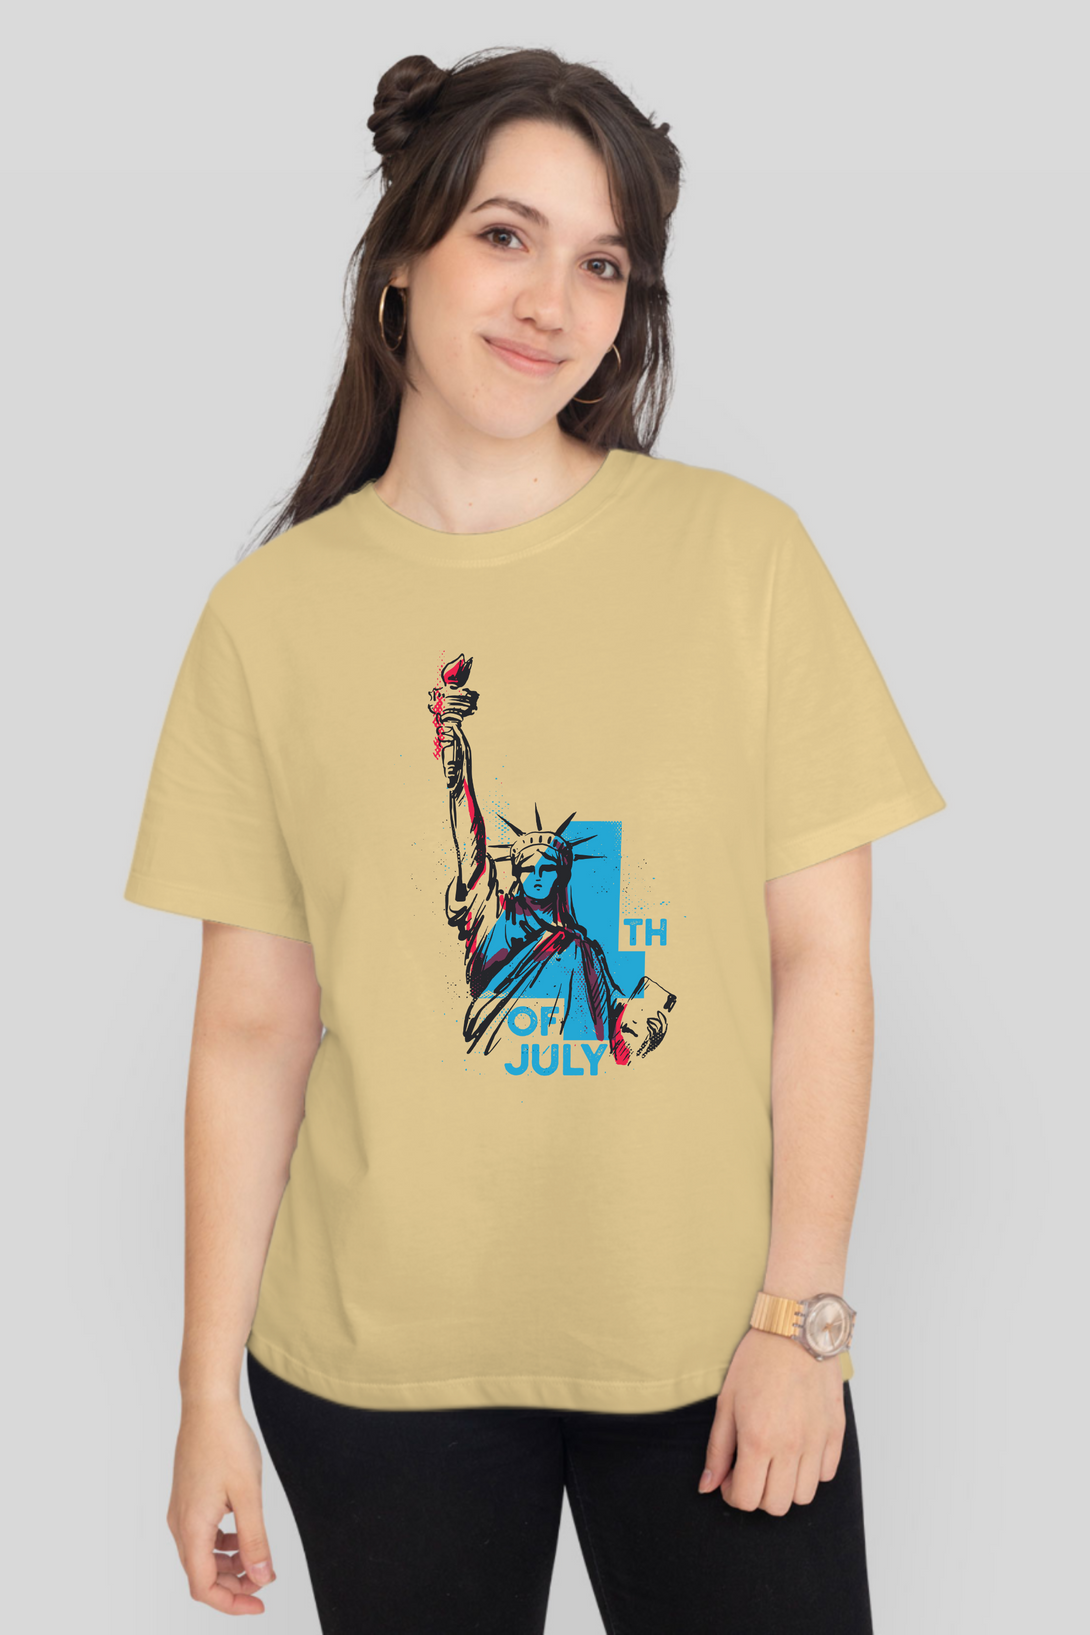 Statue Of Liberty Vintage Printed T-Shirt For Women - WowWaves - 11